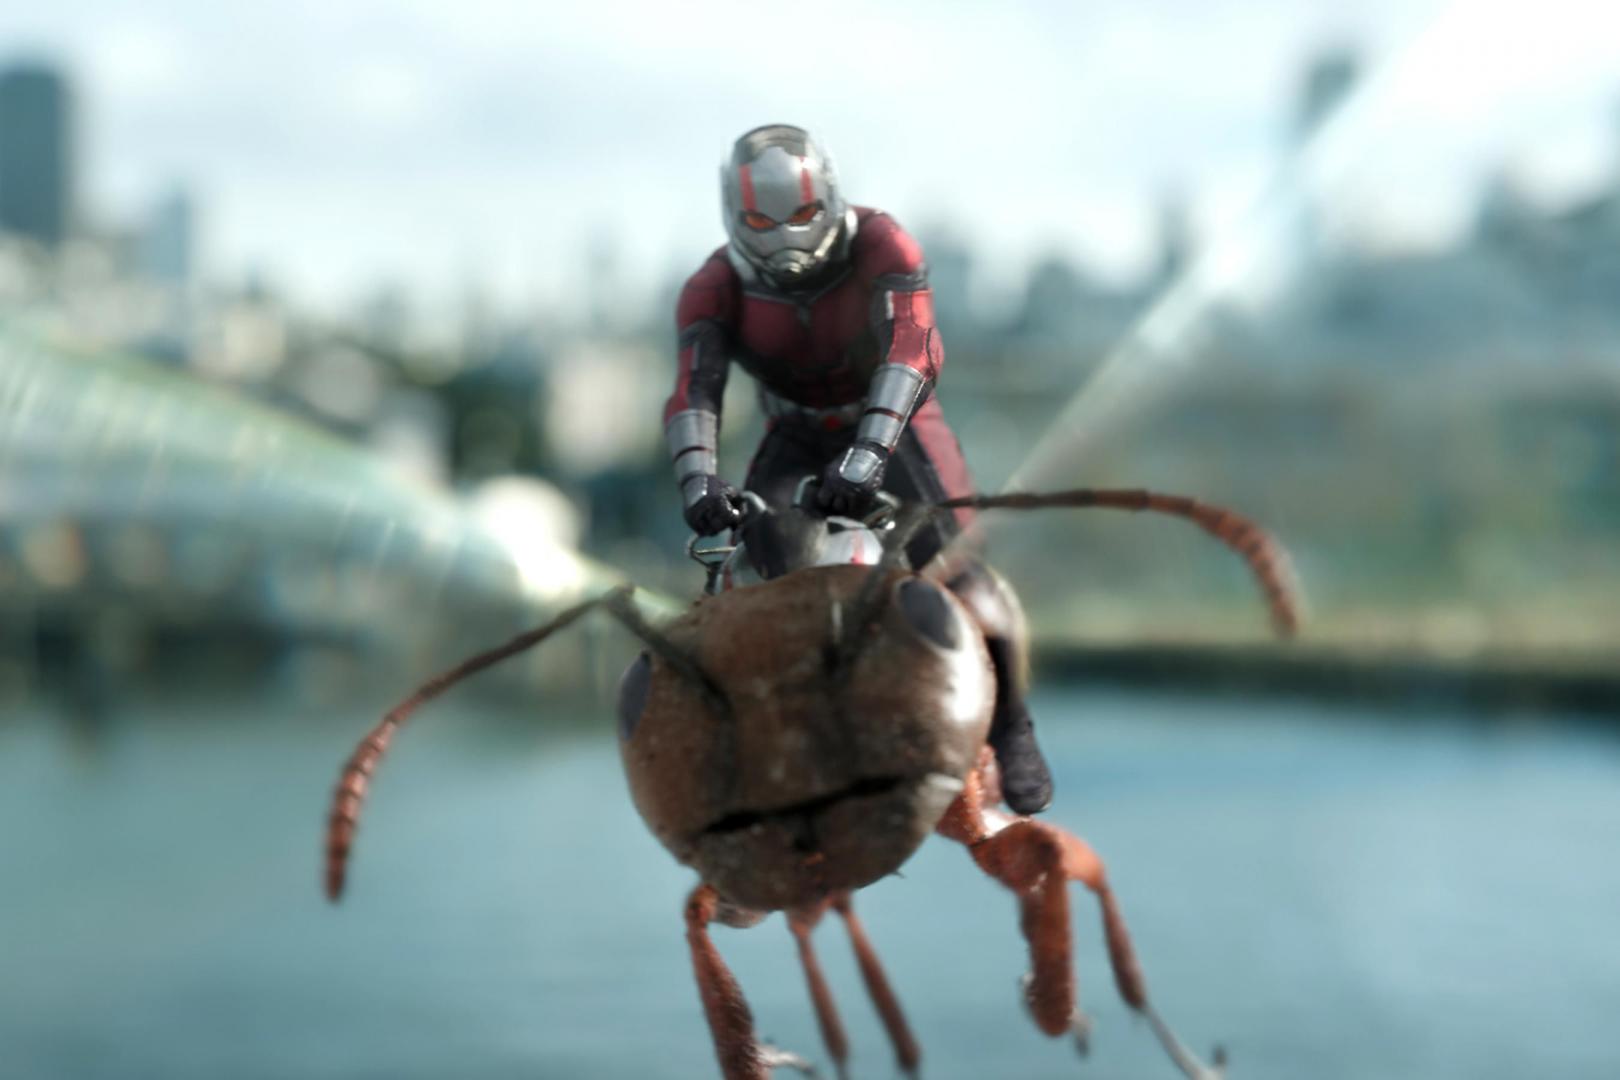 ant-man-and-the-wasp-new-image